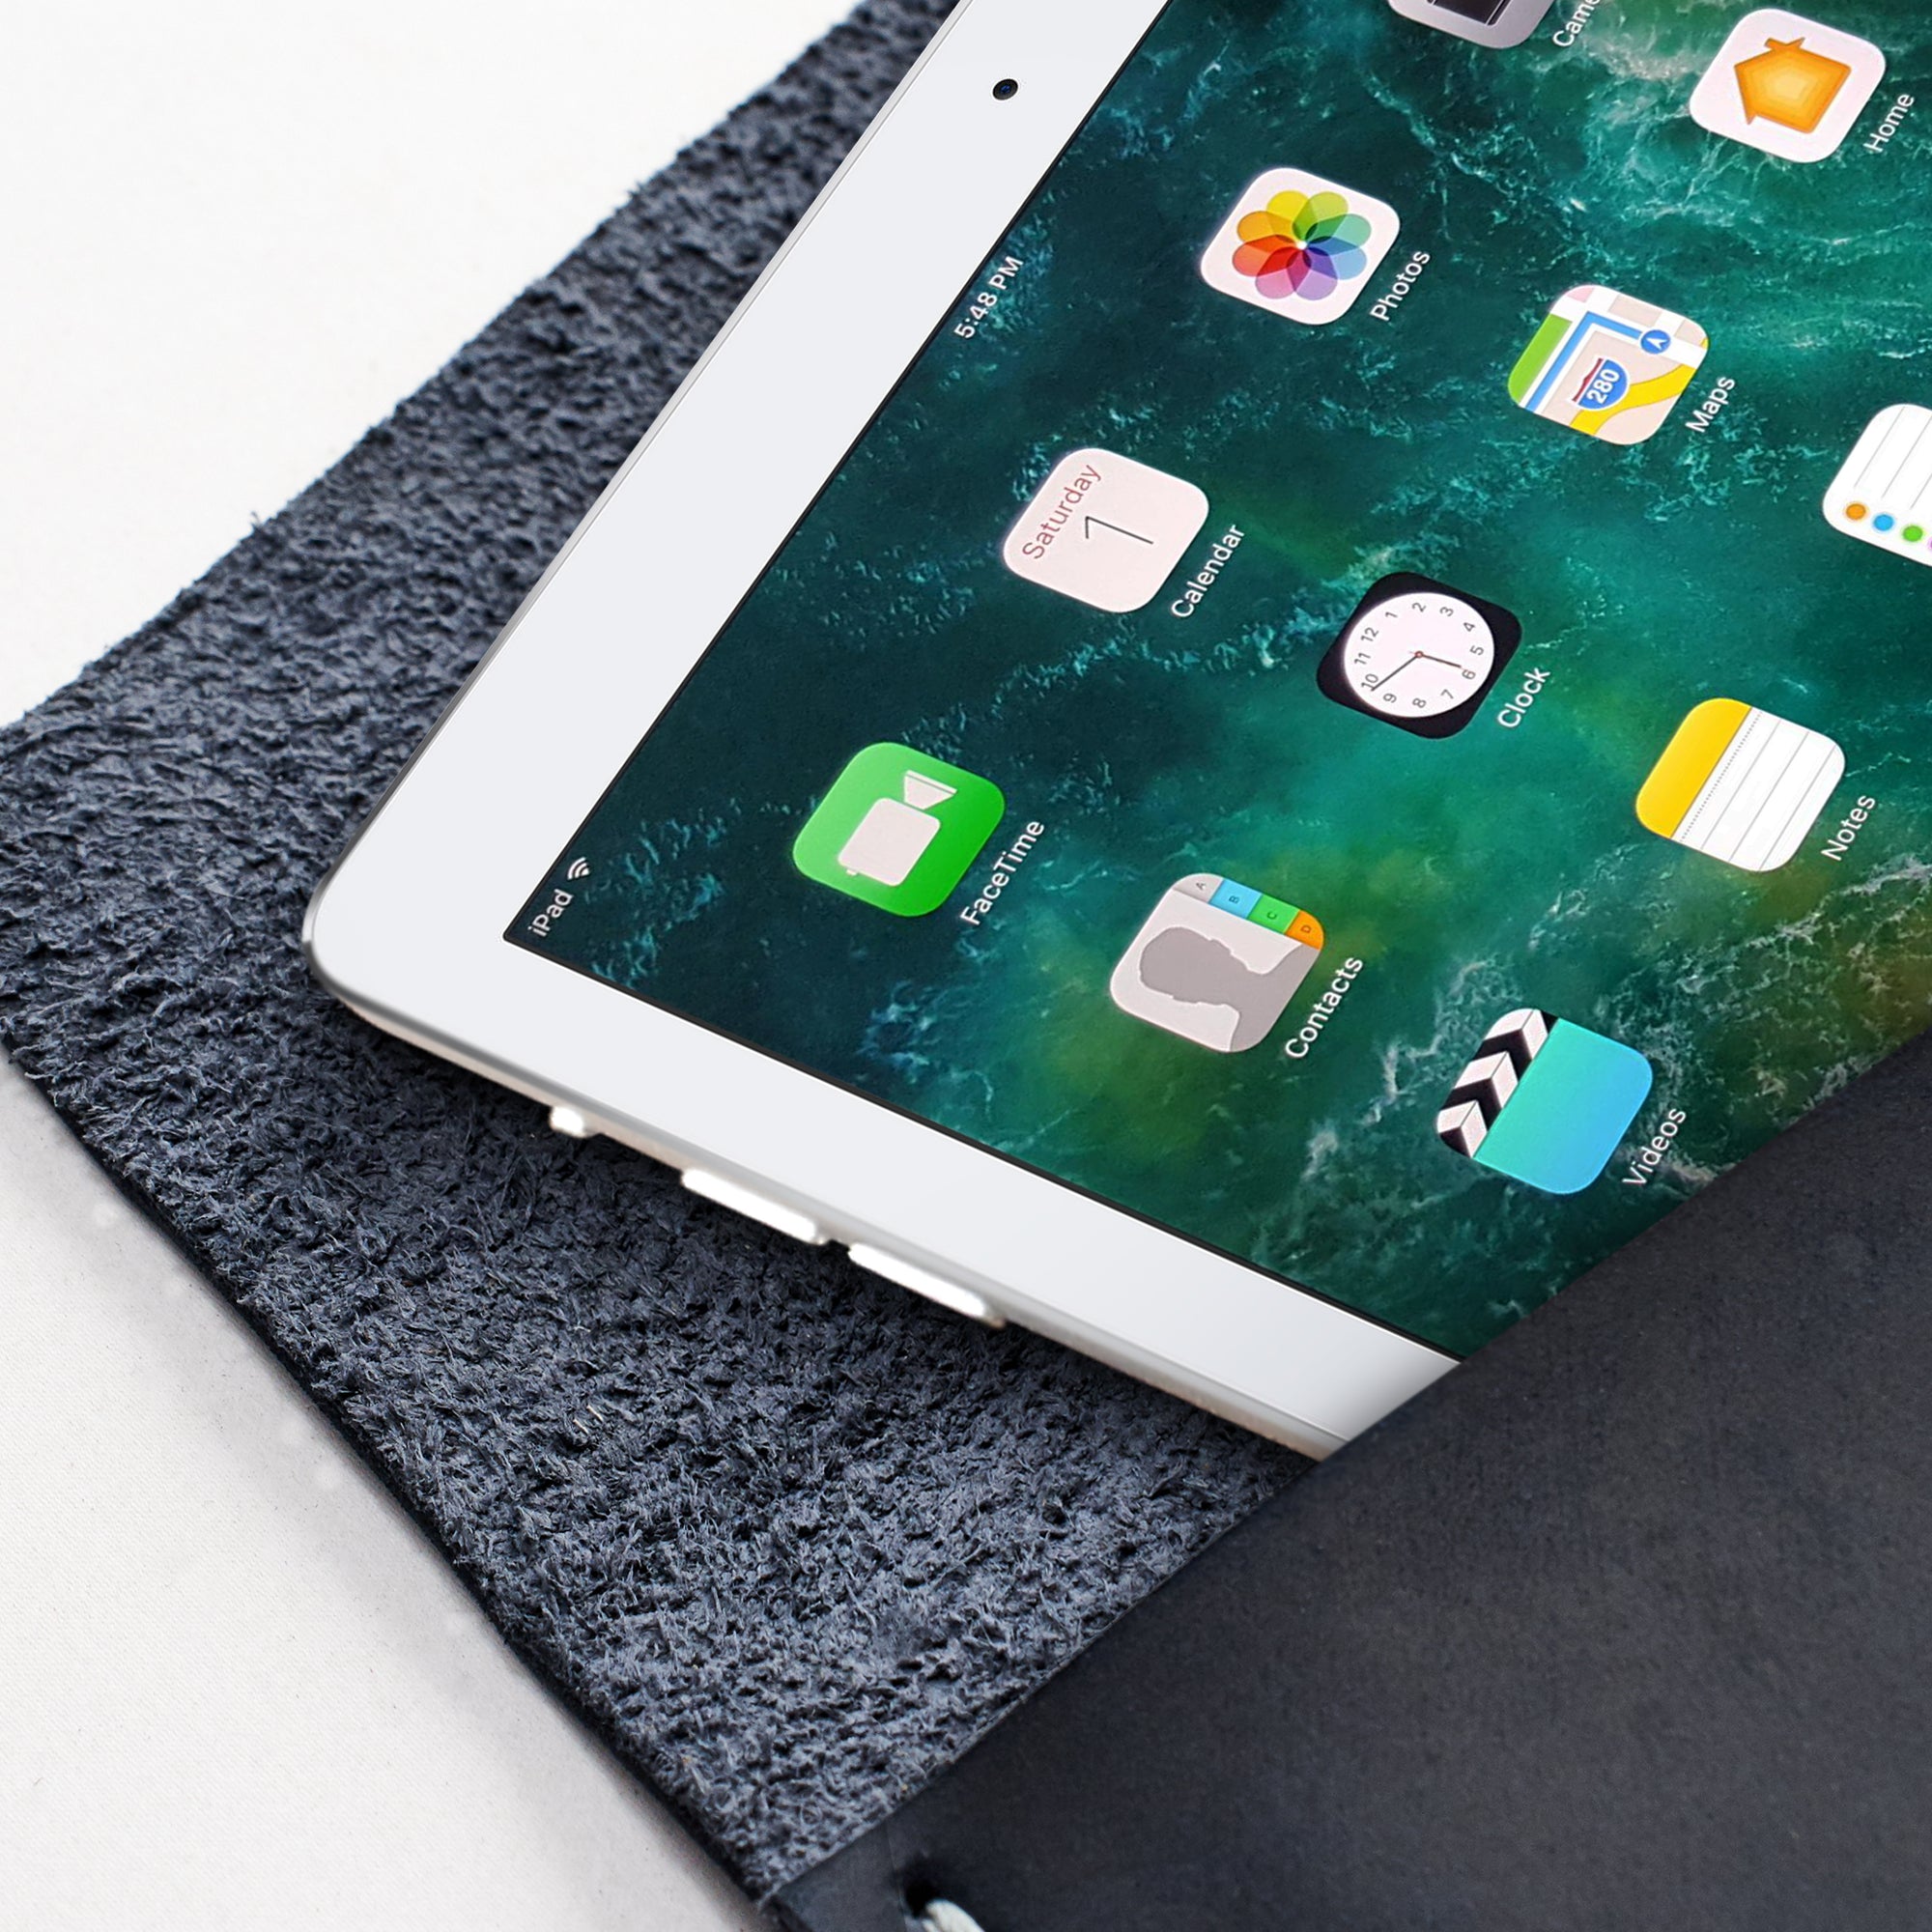 Apple Accessories. iPad Sleeve. iPad Leather Case Navy With Apple Pencil Holder by Capra Leather